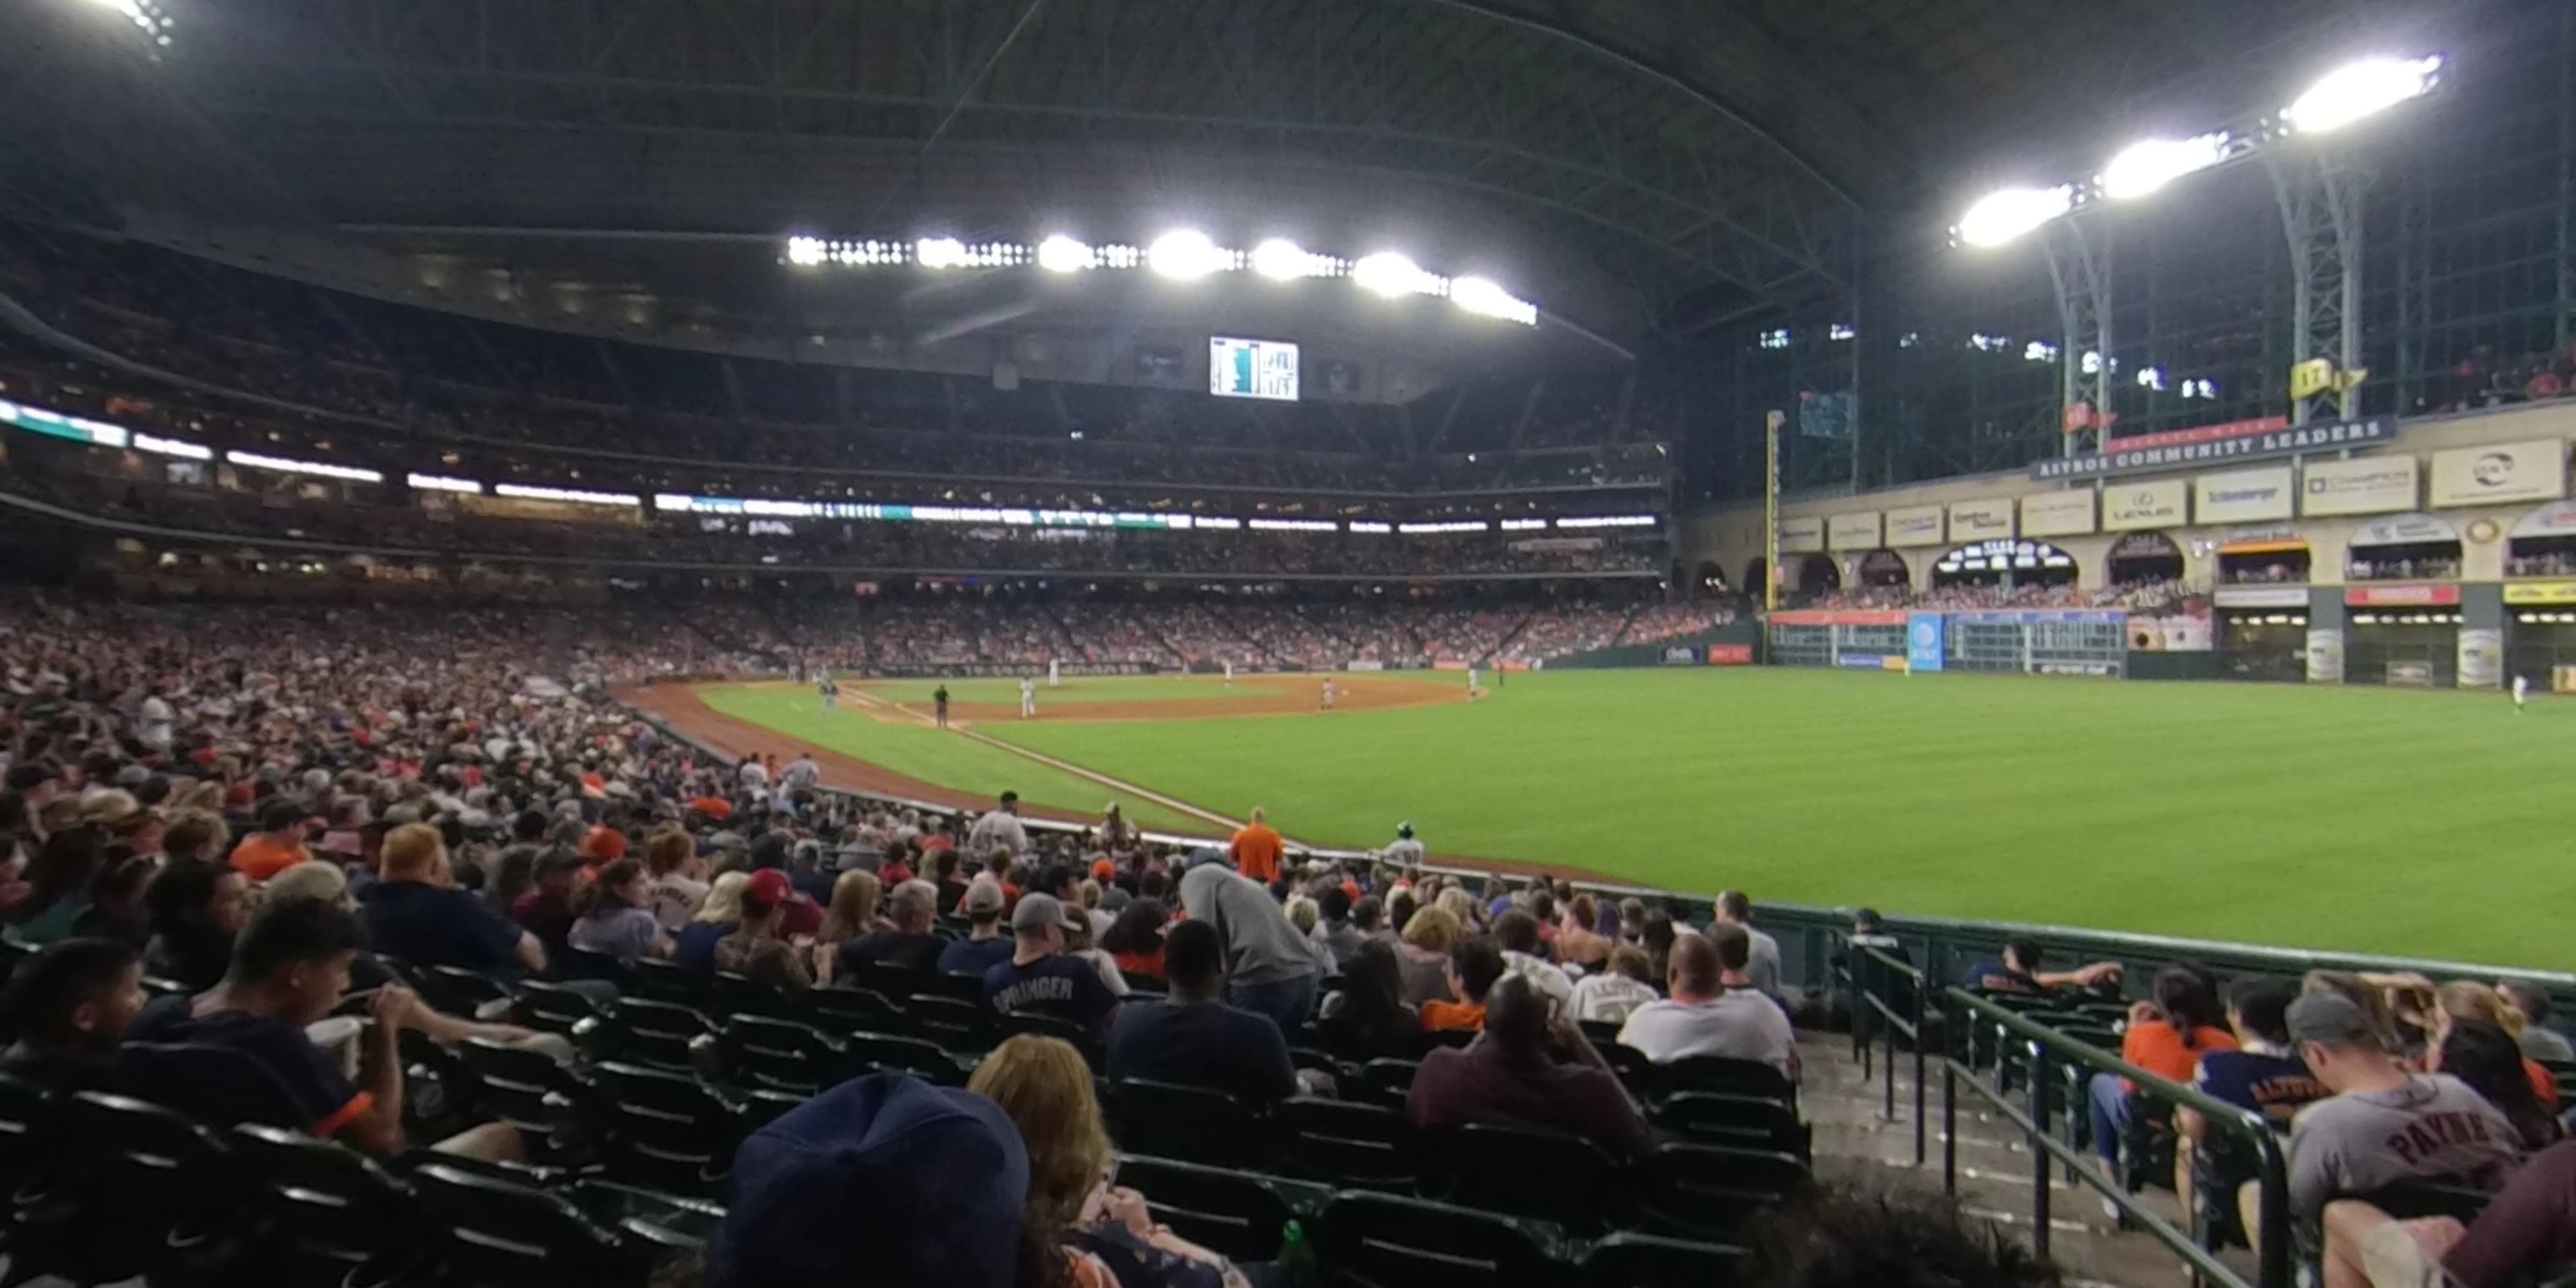 Astros Seating Chart View